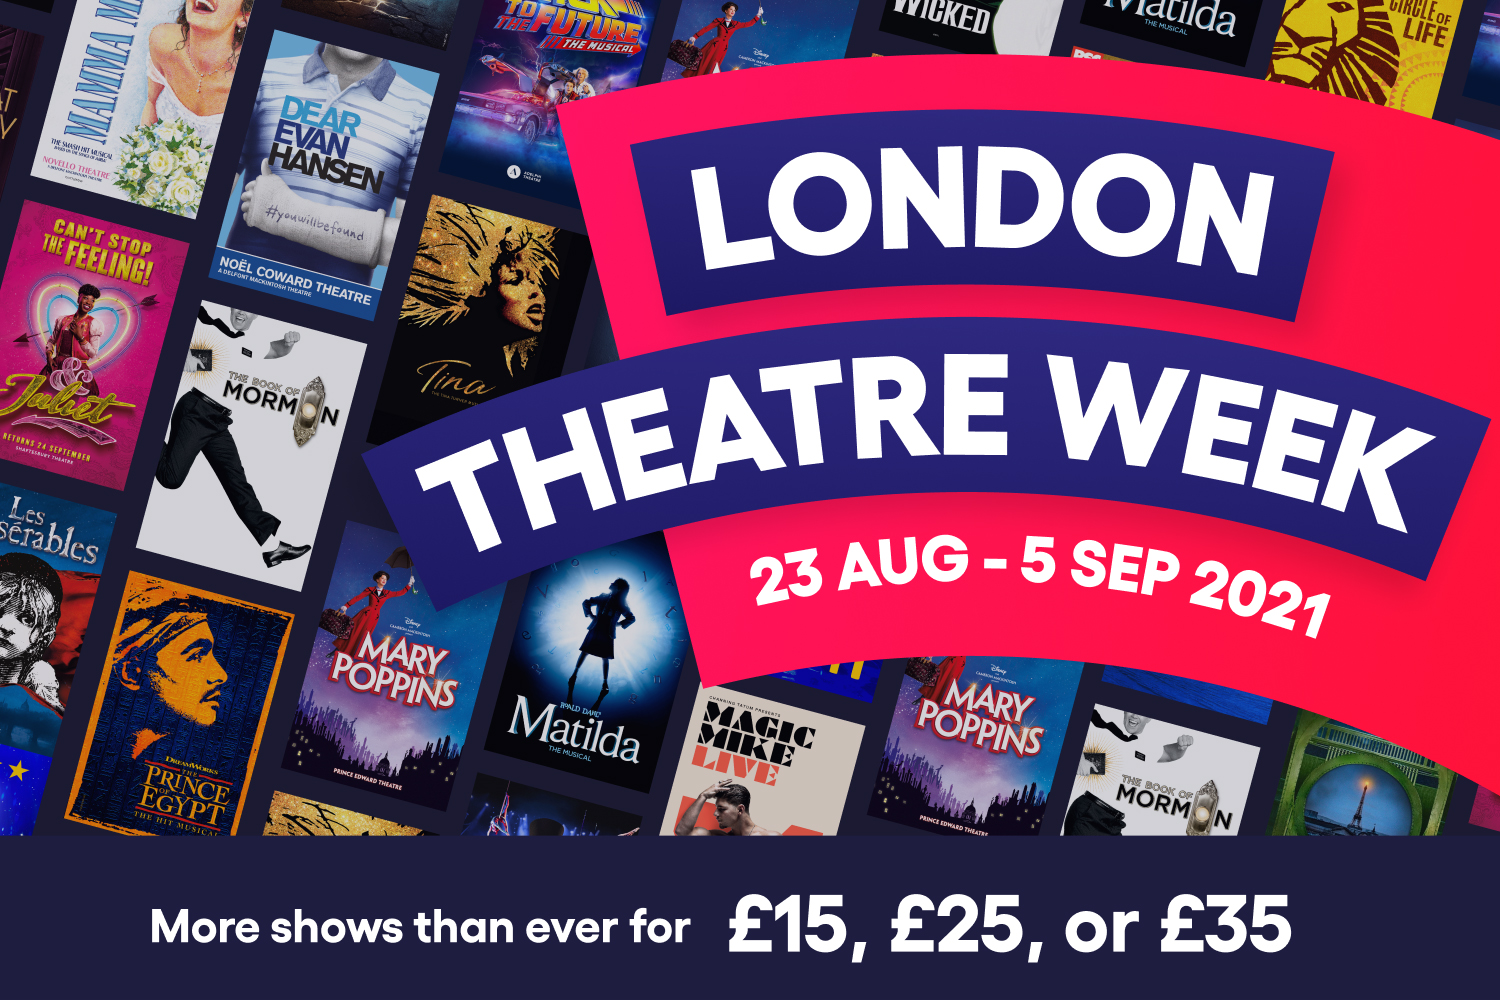 Head back to the theatre with London Theatre Week prices at £15, £25